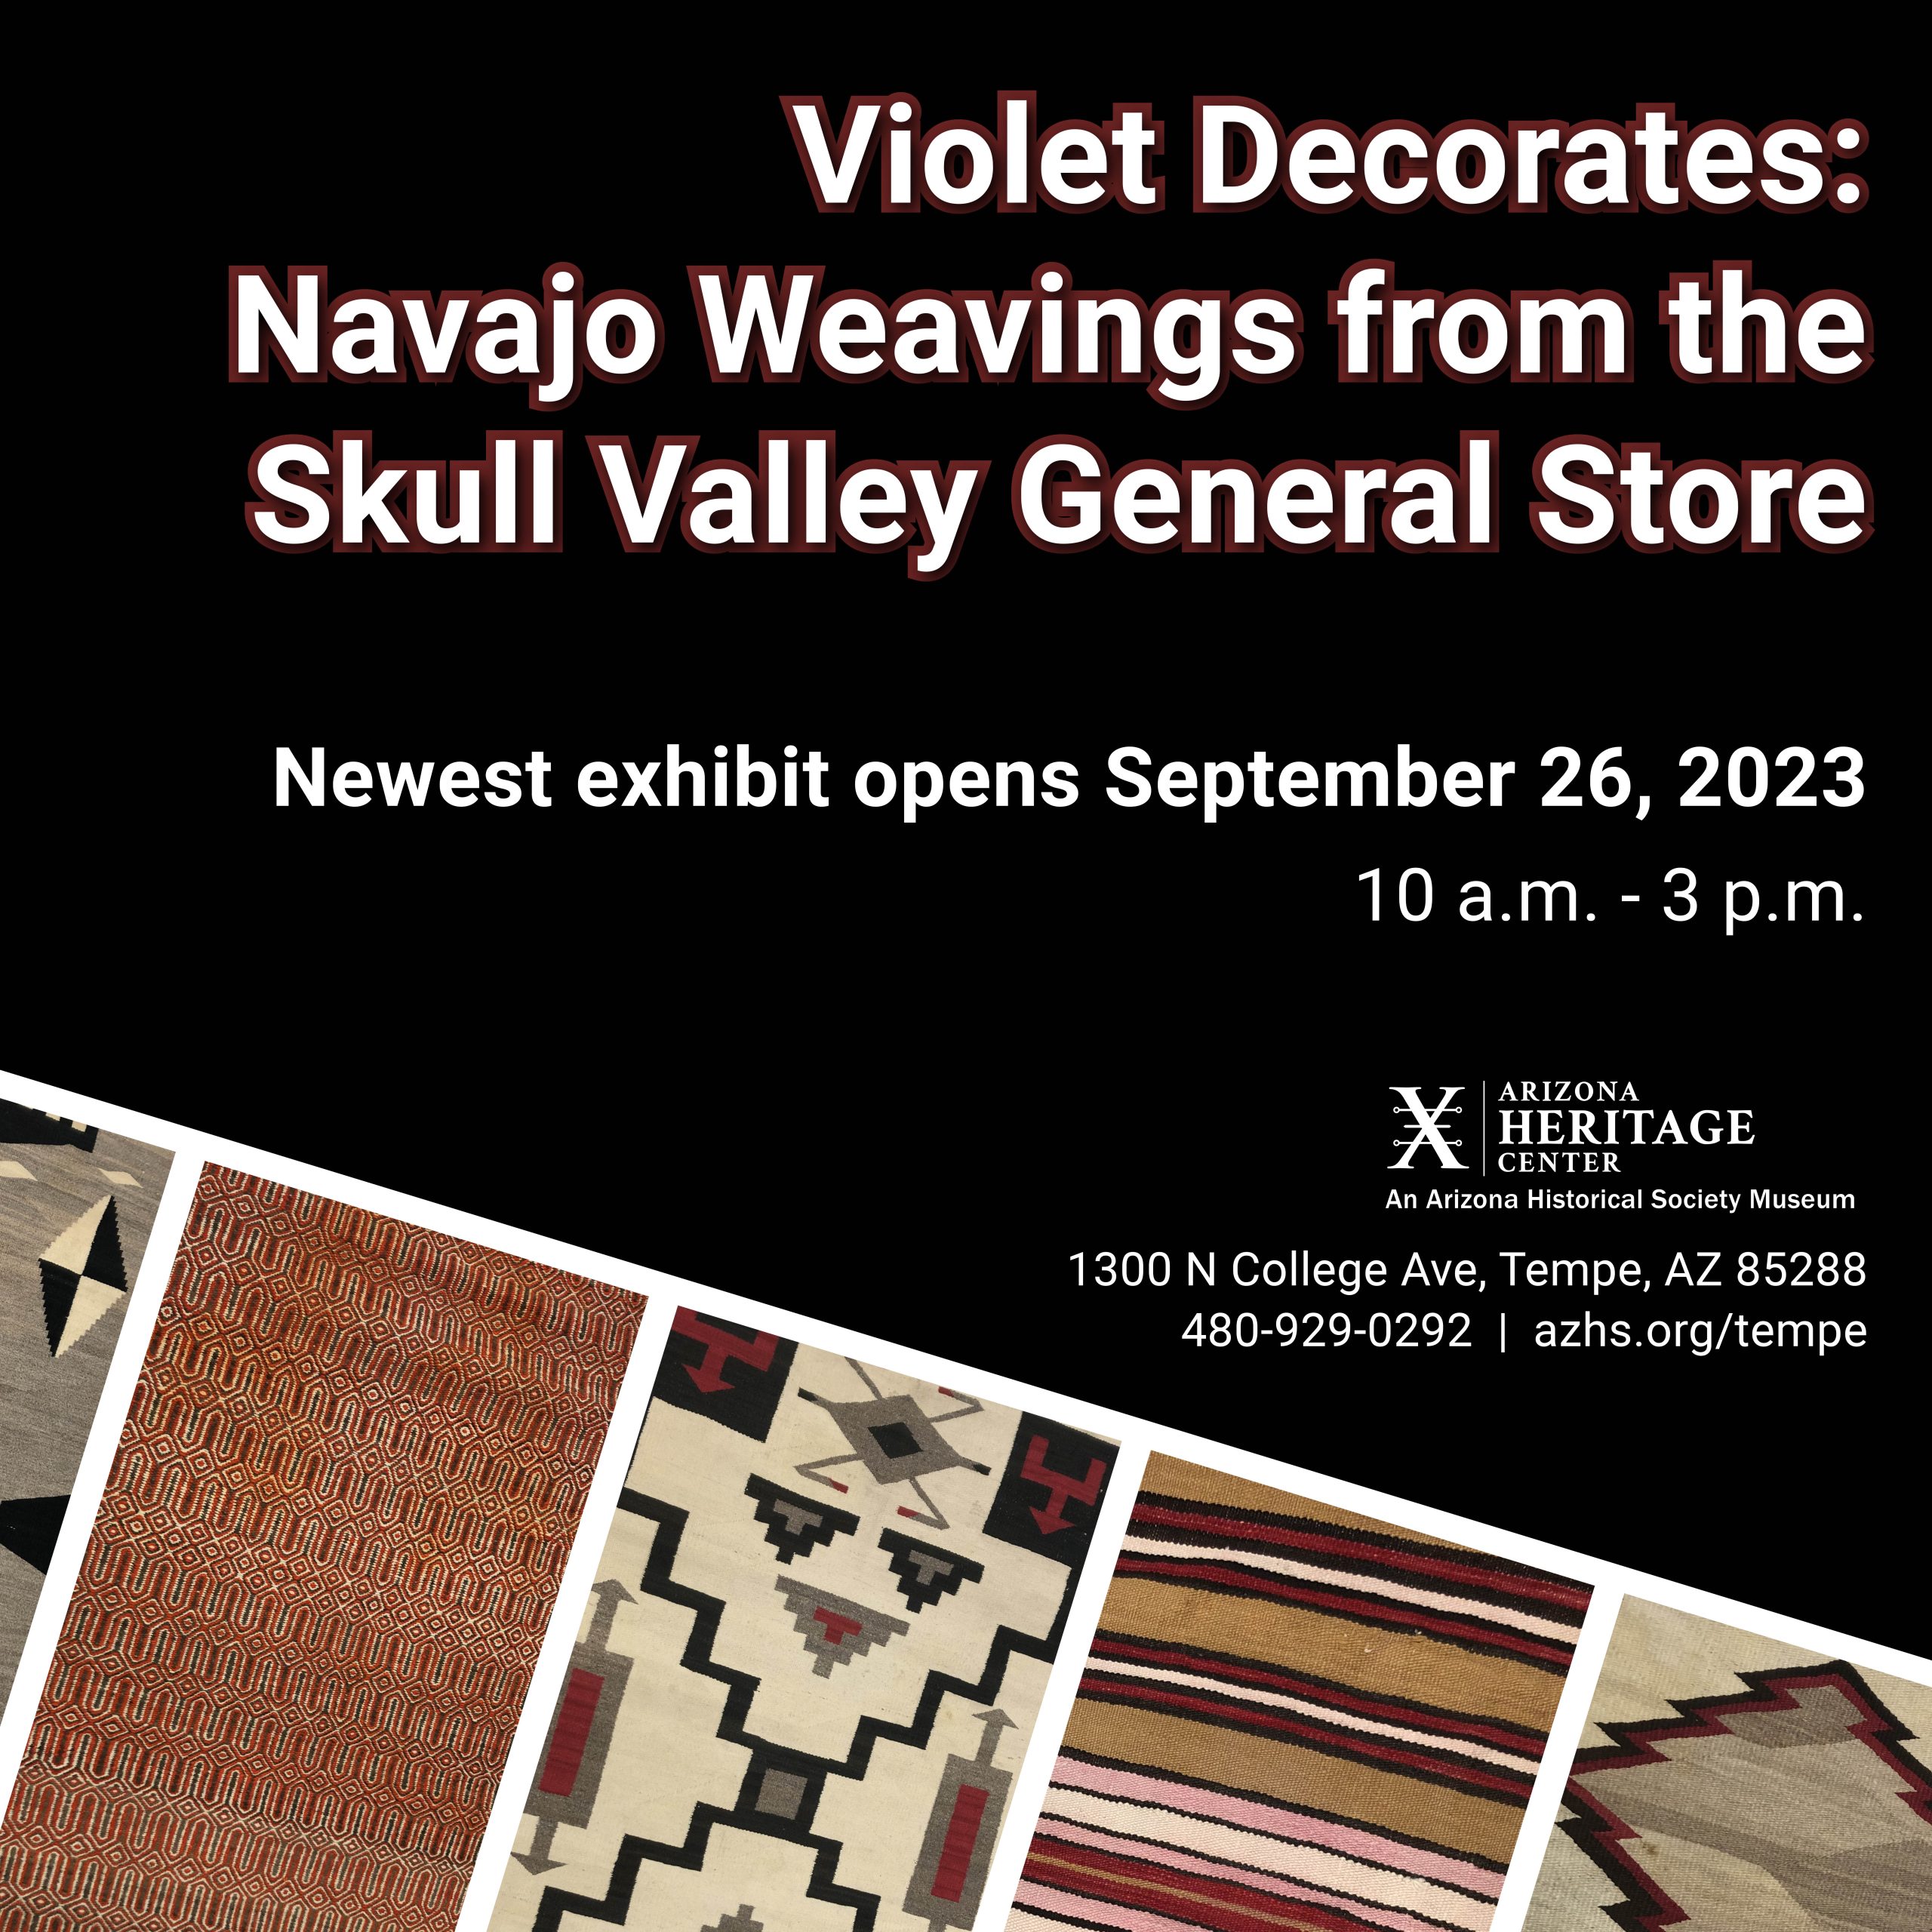 Violet Decorates: Navajo Weavings from the Skull Valley General Store